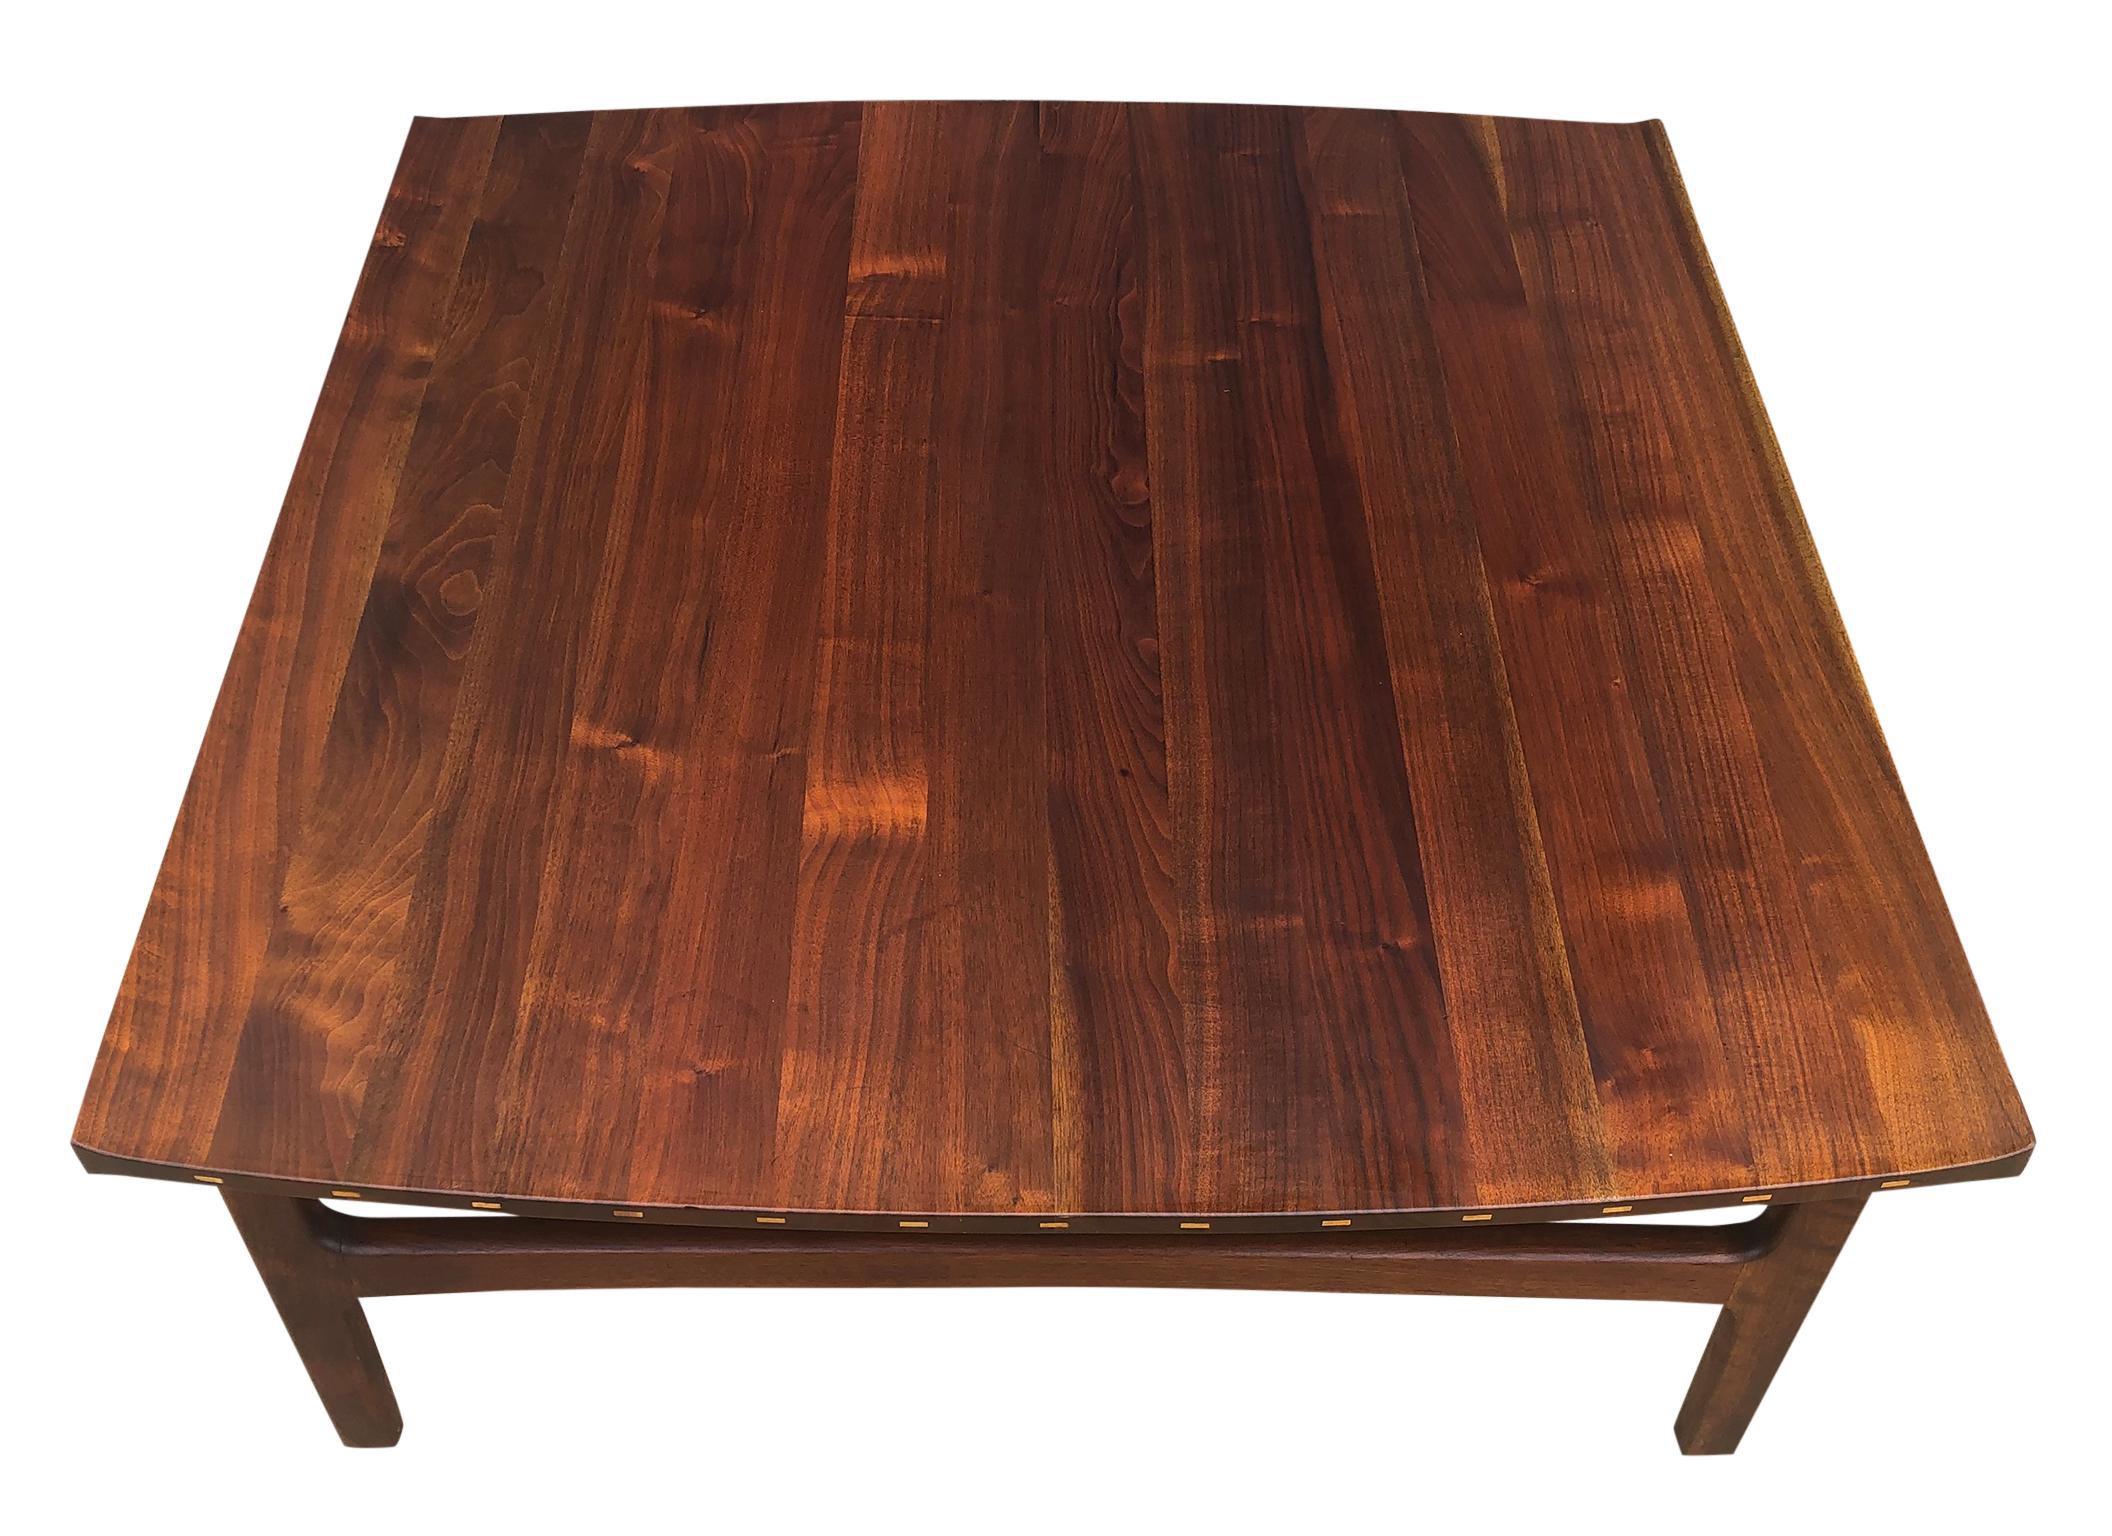 Stunning detailed solid teak Swedish coffee table featuring sculptural lipped edge top with two elegantly curved sides. Exposed wood joinery on the curved edges feature distinctive inlays in lighter, contrasting wood. Exceptional vintage condition